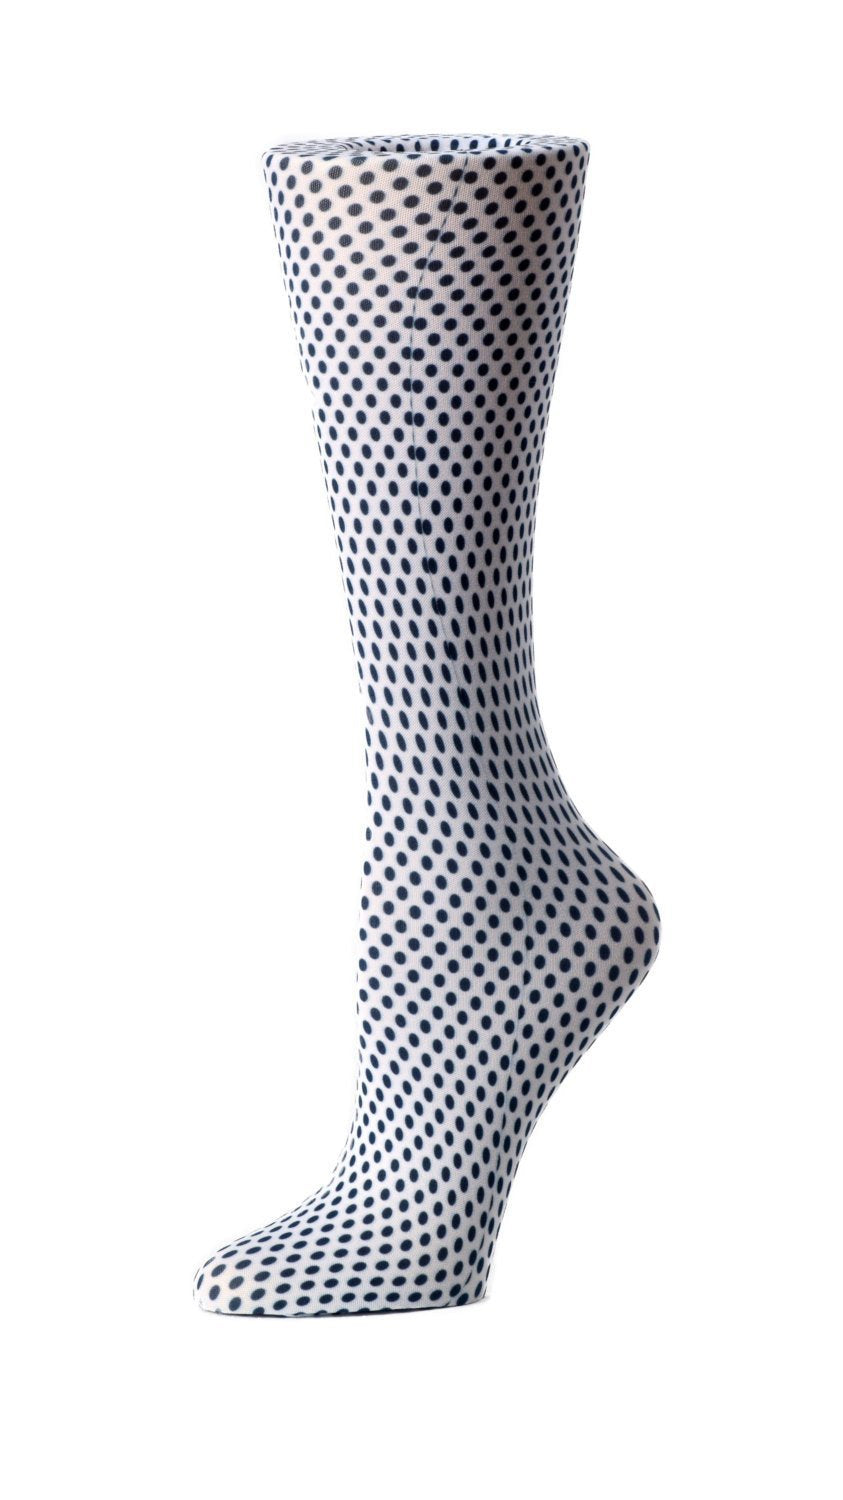 Cutieful Moderate Compression Socks 10-18 mmHg Knit in Print Patterns Traditional Polka Dot at Parker's Clothing and Shoes.